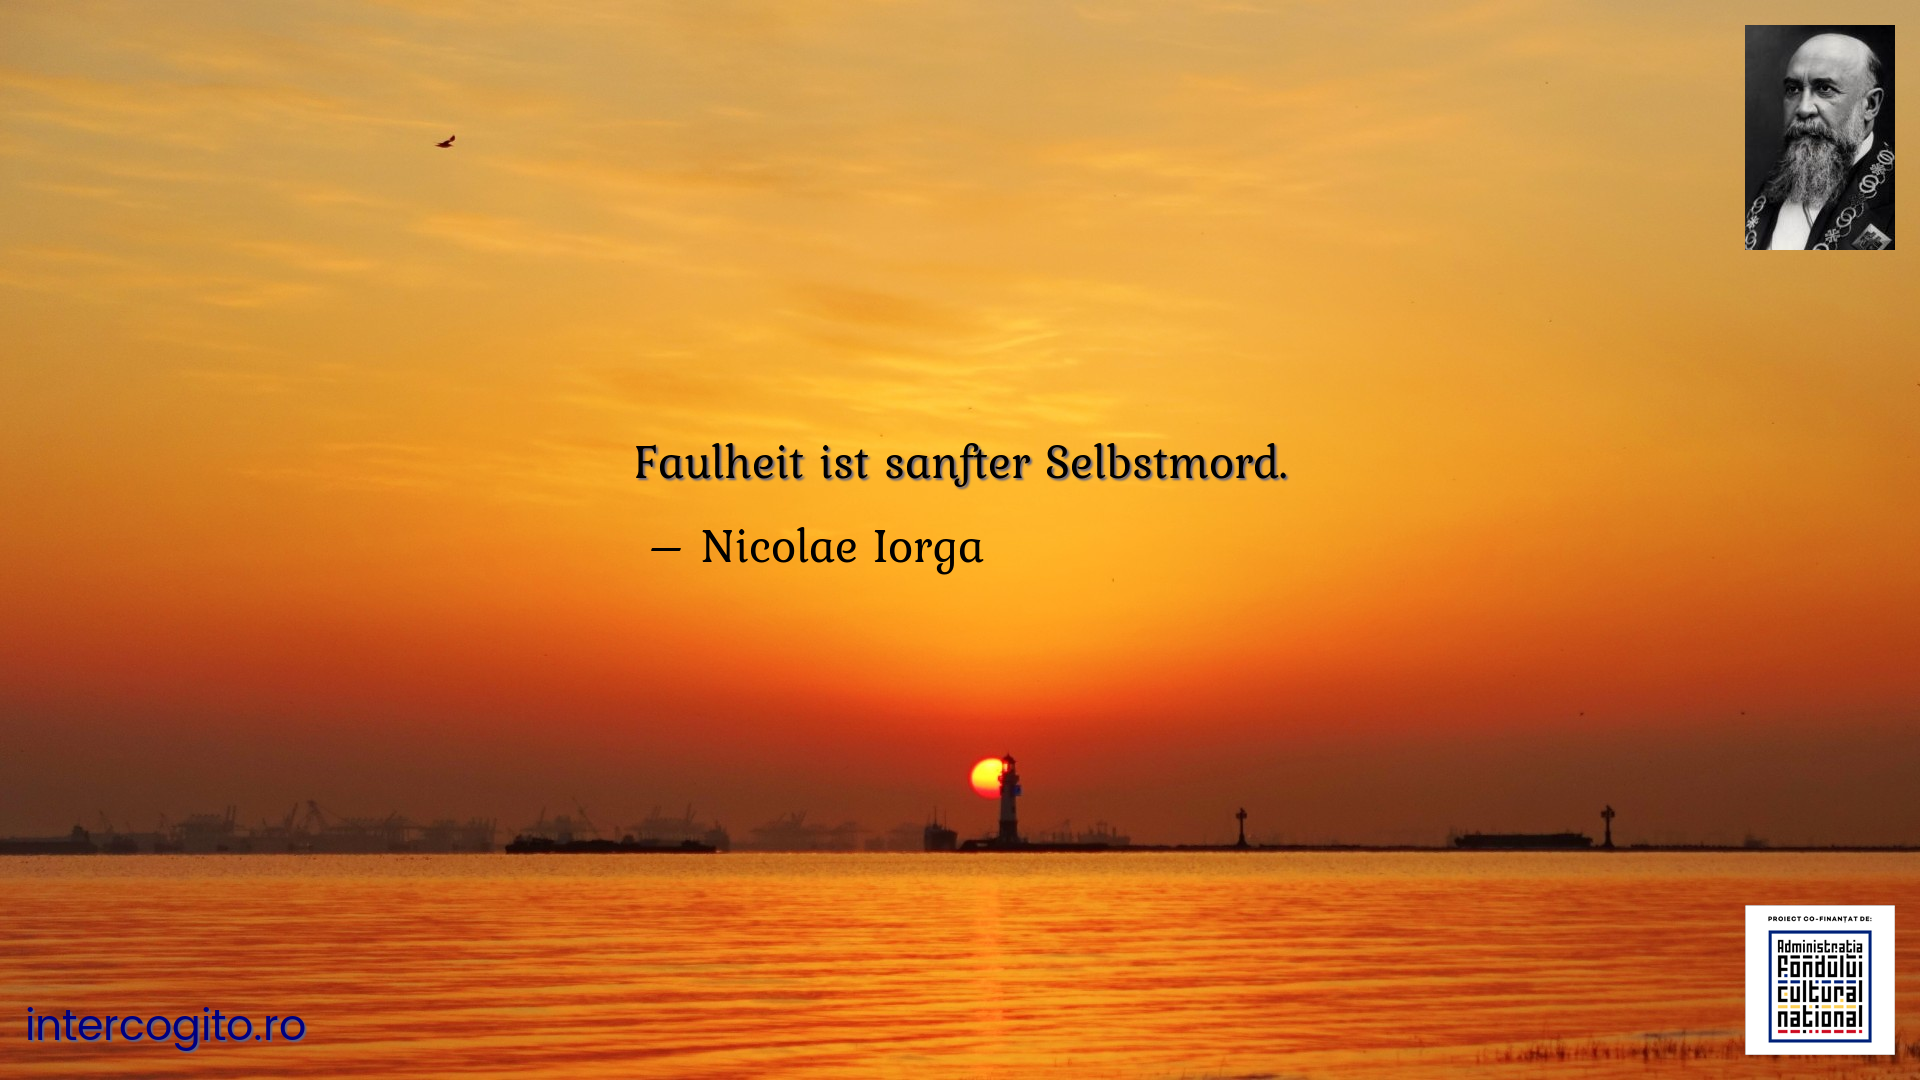 Faulheit ist sanfter Selbstmord.